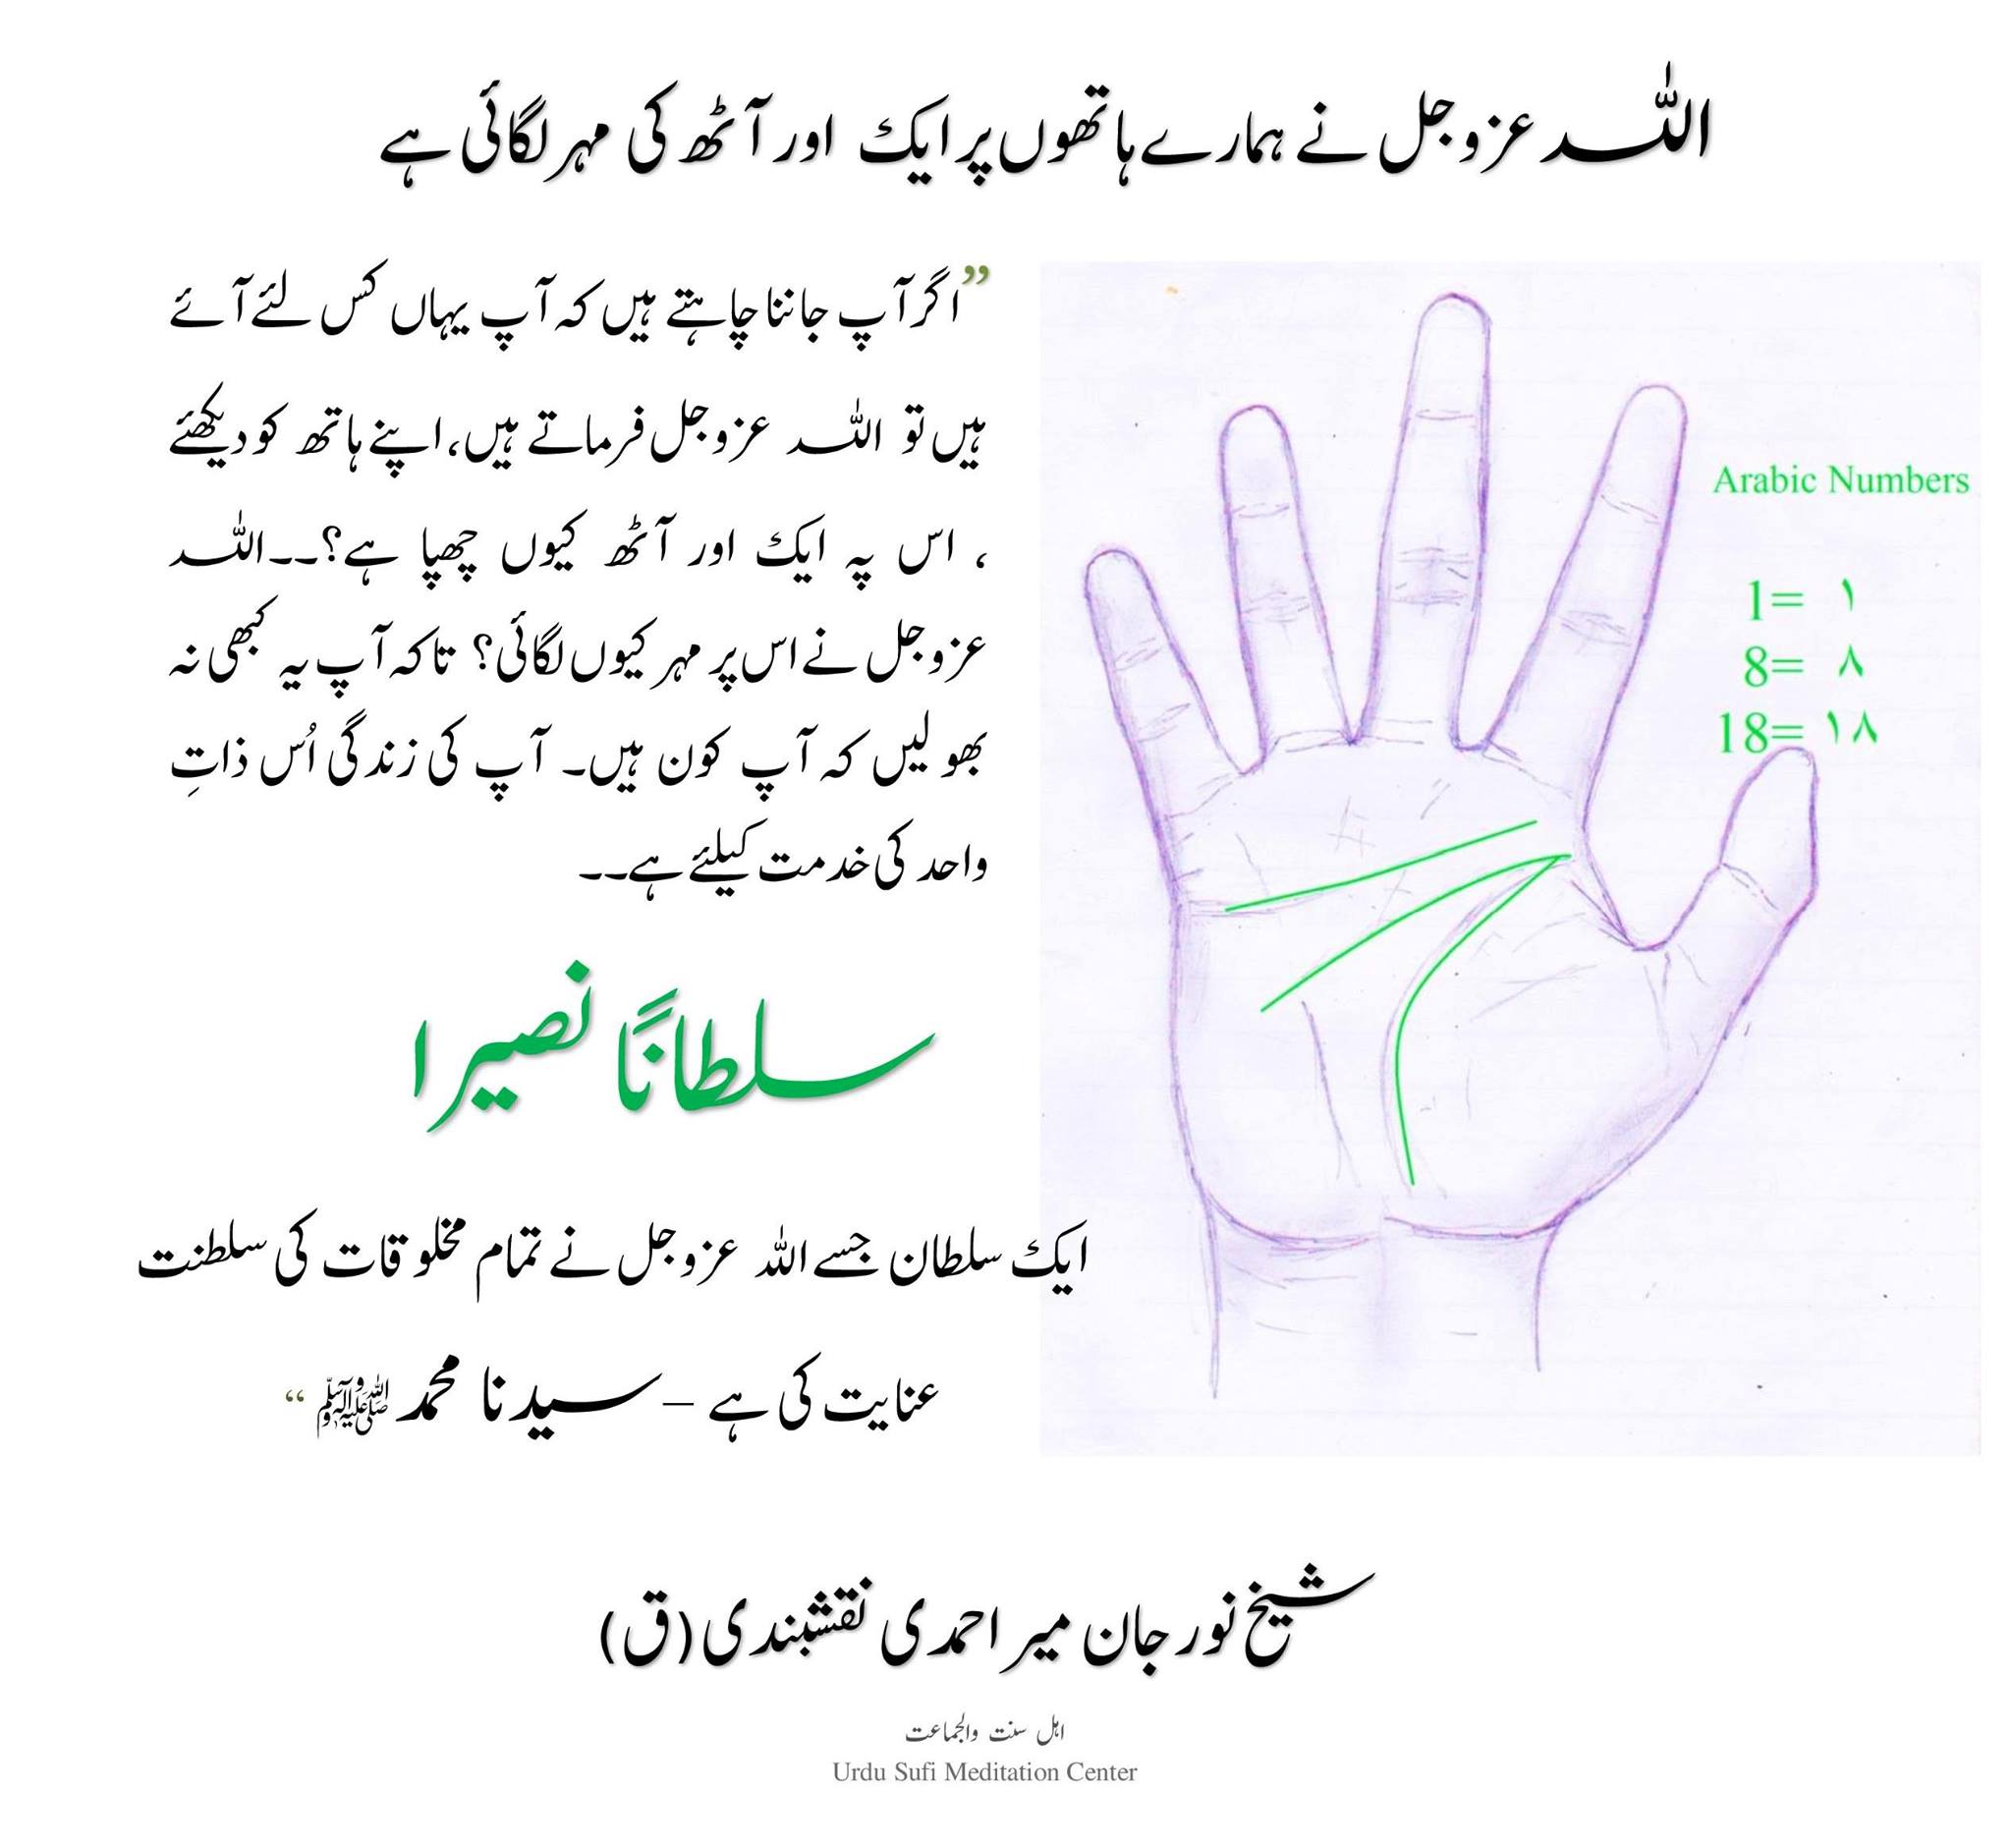 Allah (AJ) Has Stamped Our Hands with 1 & 8
 –Our Purpose is to Serve the Sultan...